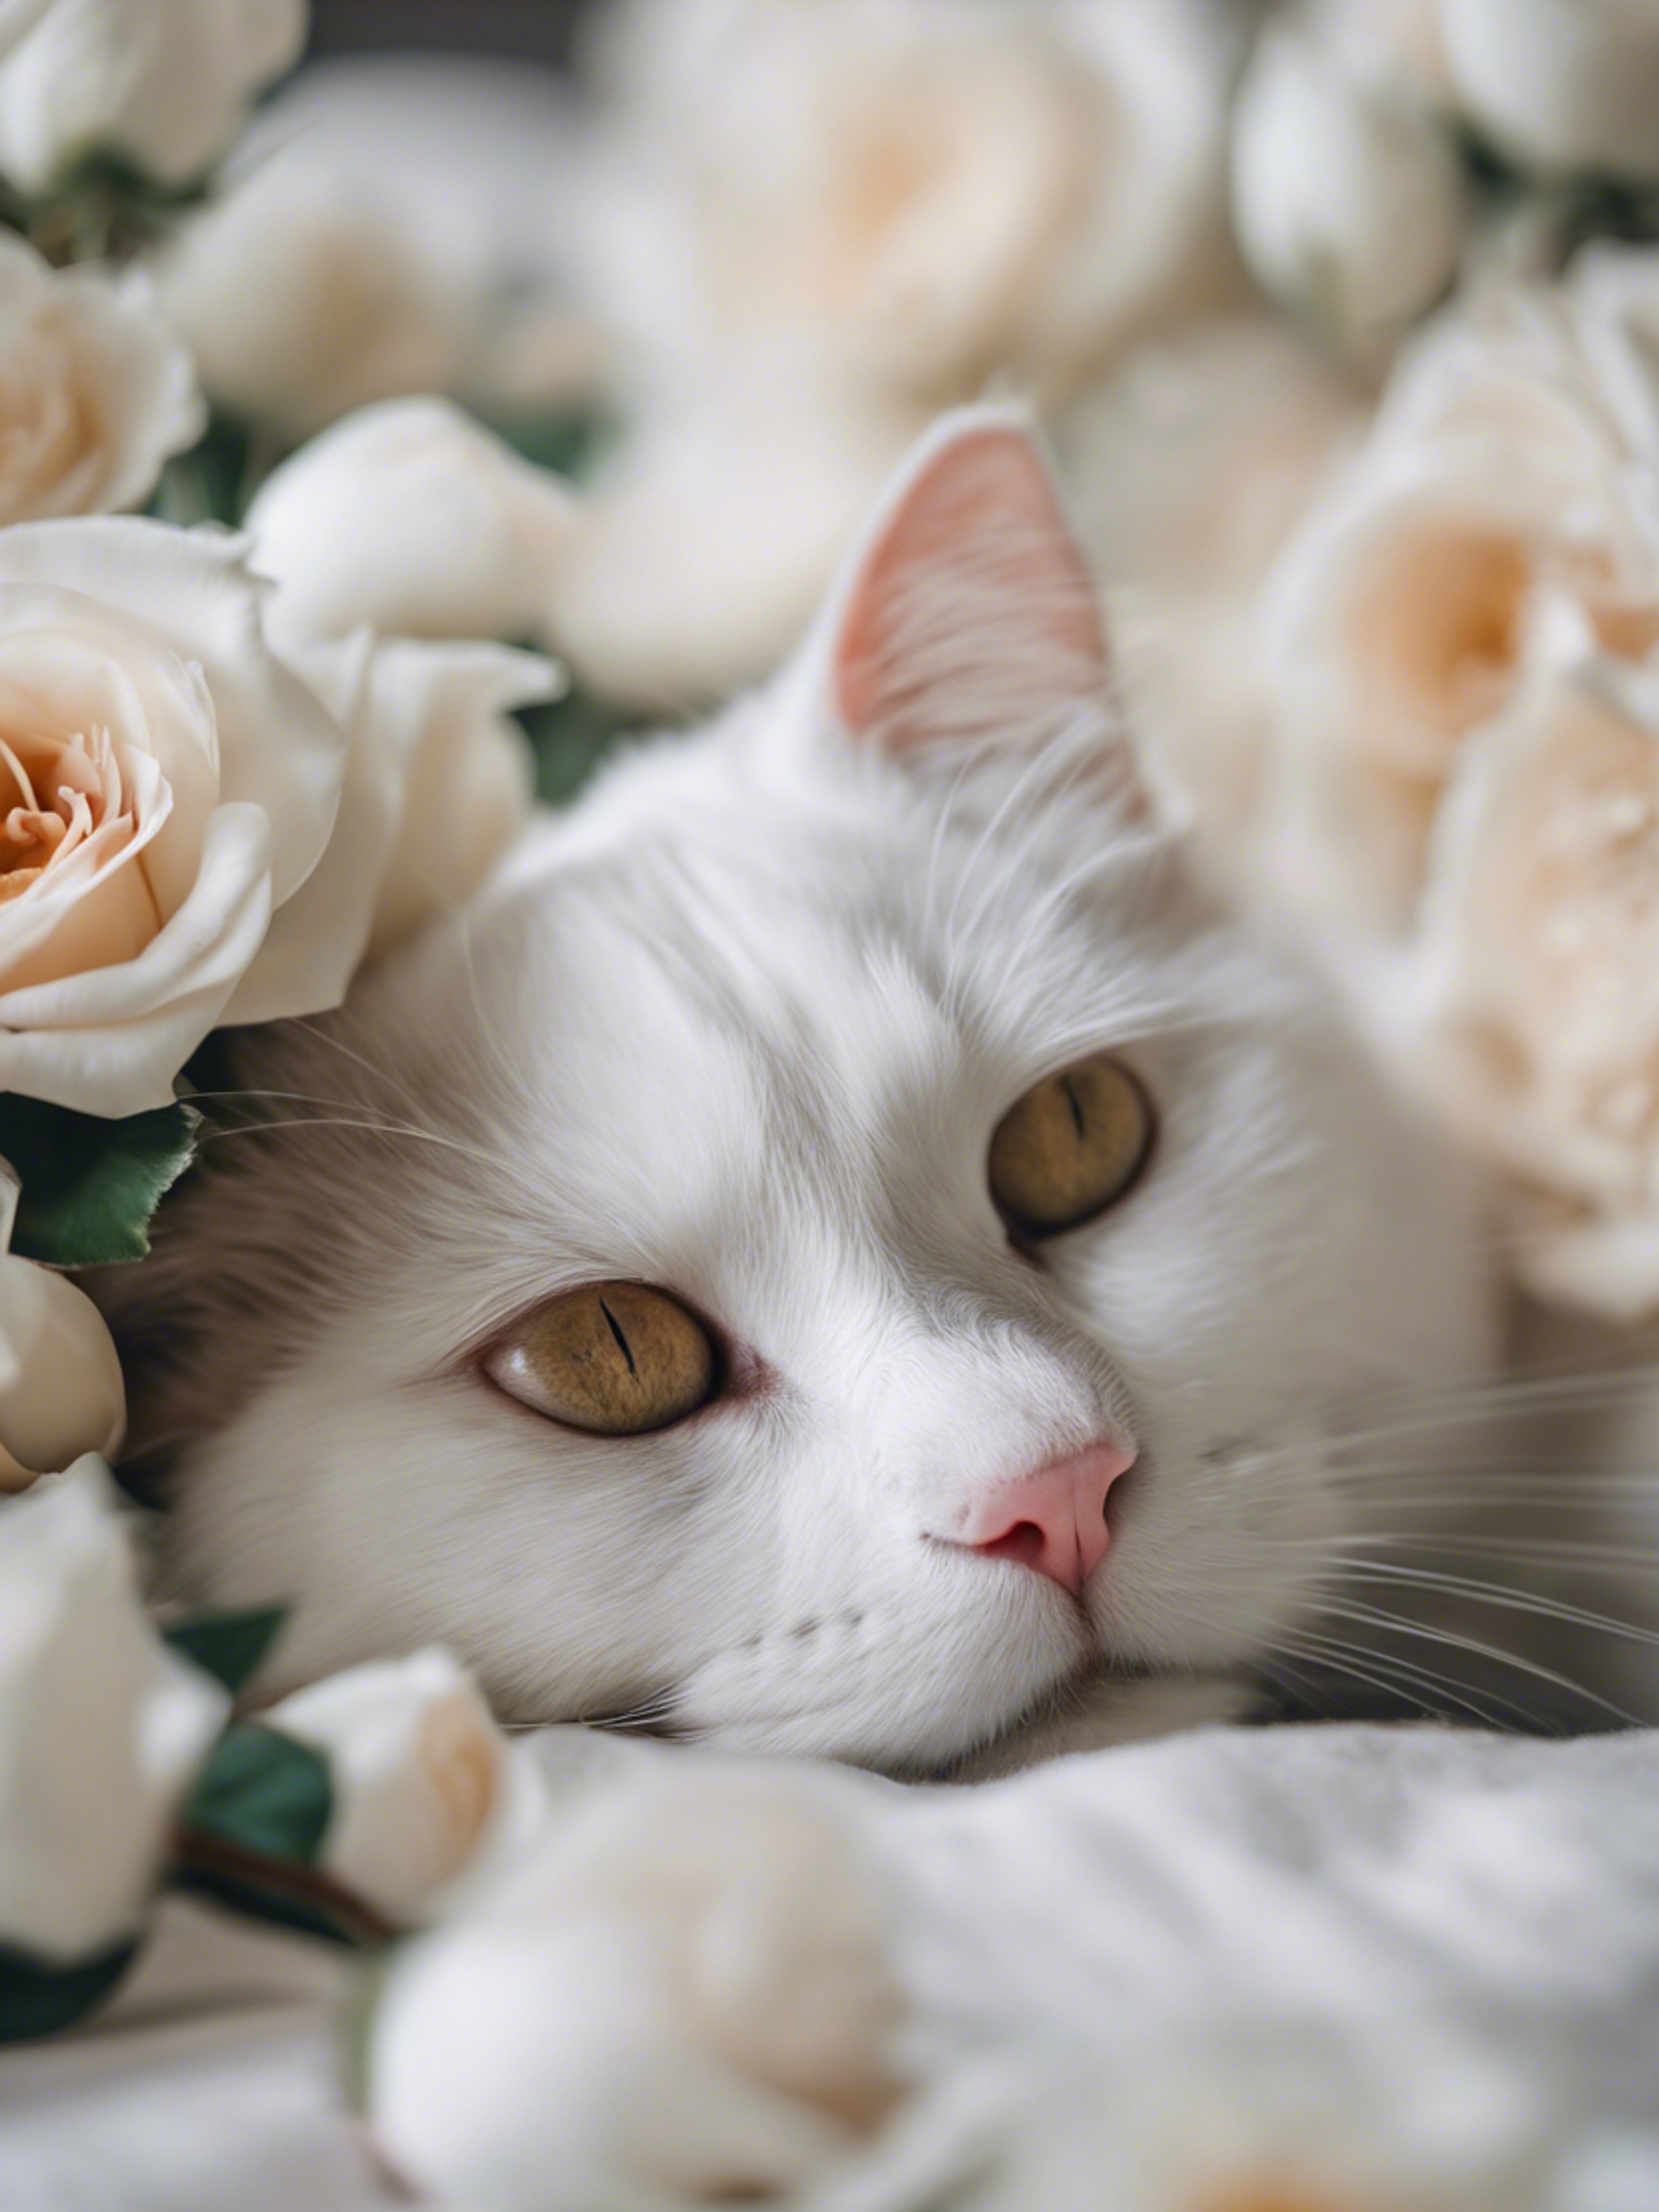 A picturesque content white cat sleeping amidst a bed of white roses. Tapetai[21bd514b84c74c92a754]